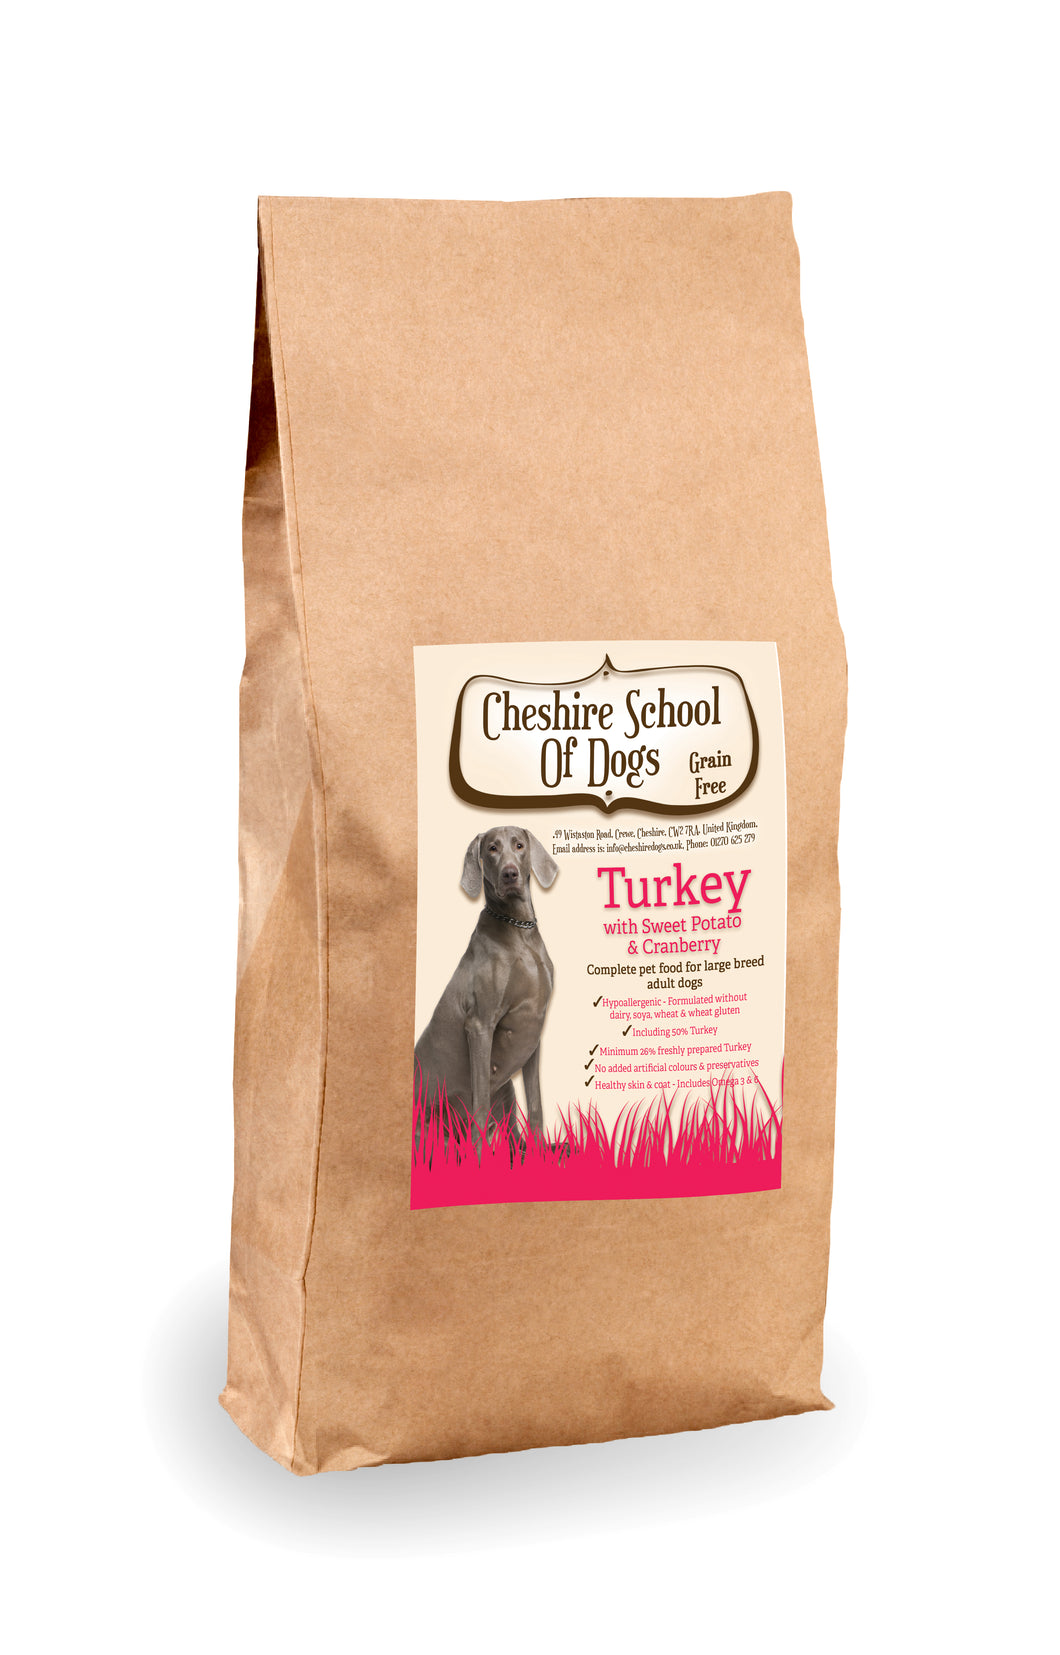 Grain Free - Turkey with Sweet Potato & Cranberry - Complete food for  ADULT LARGE BREED dogs.